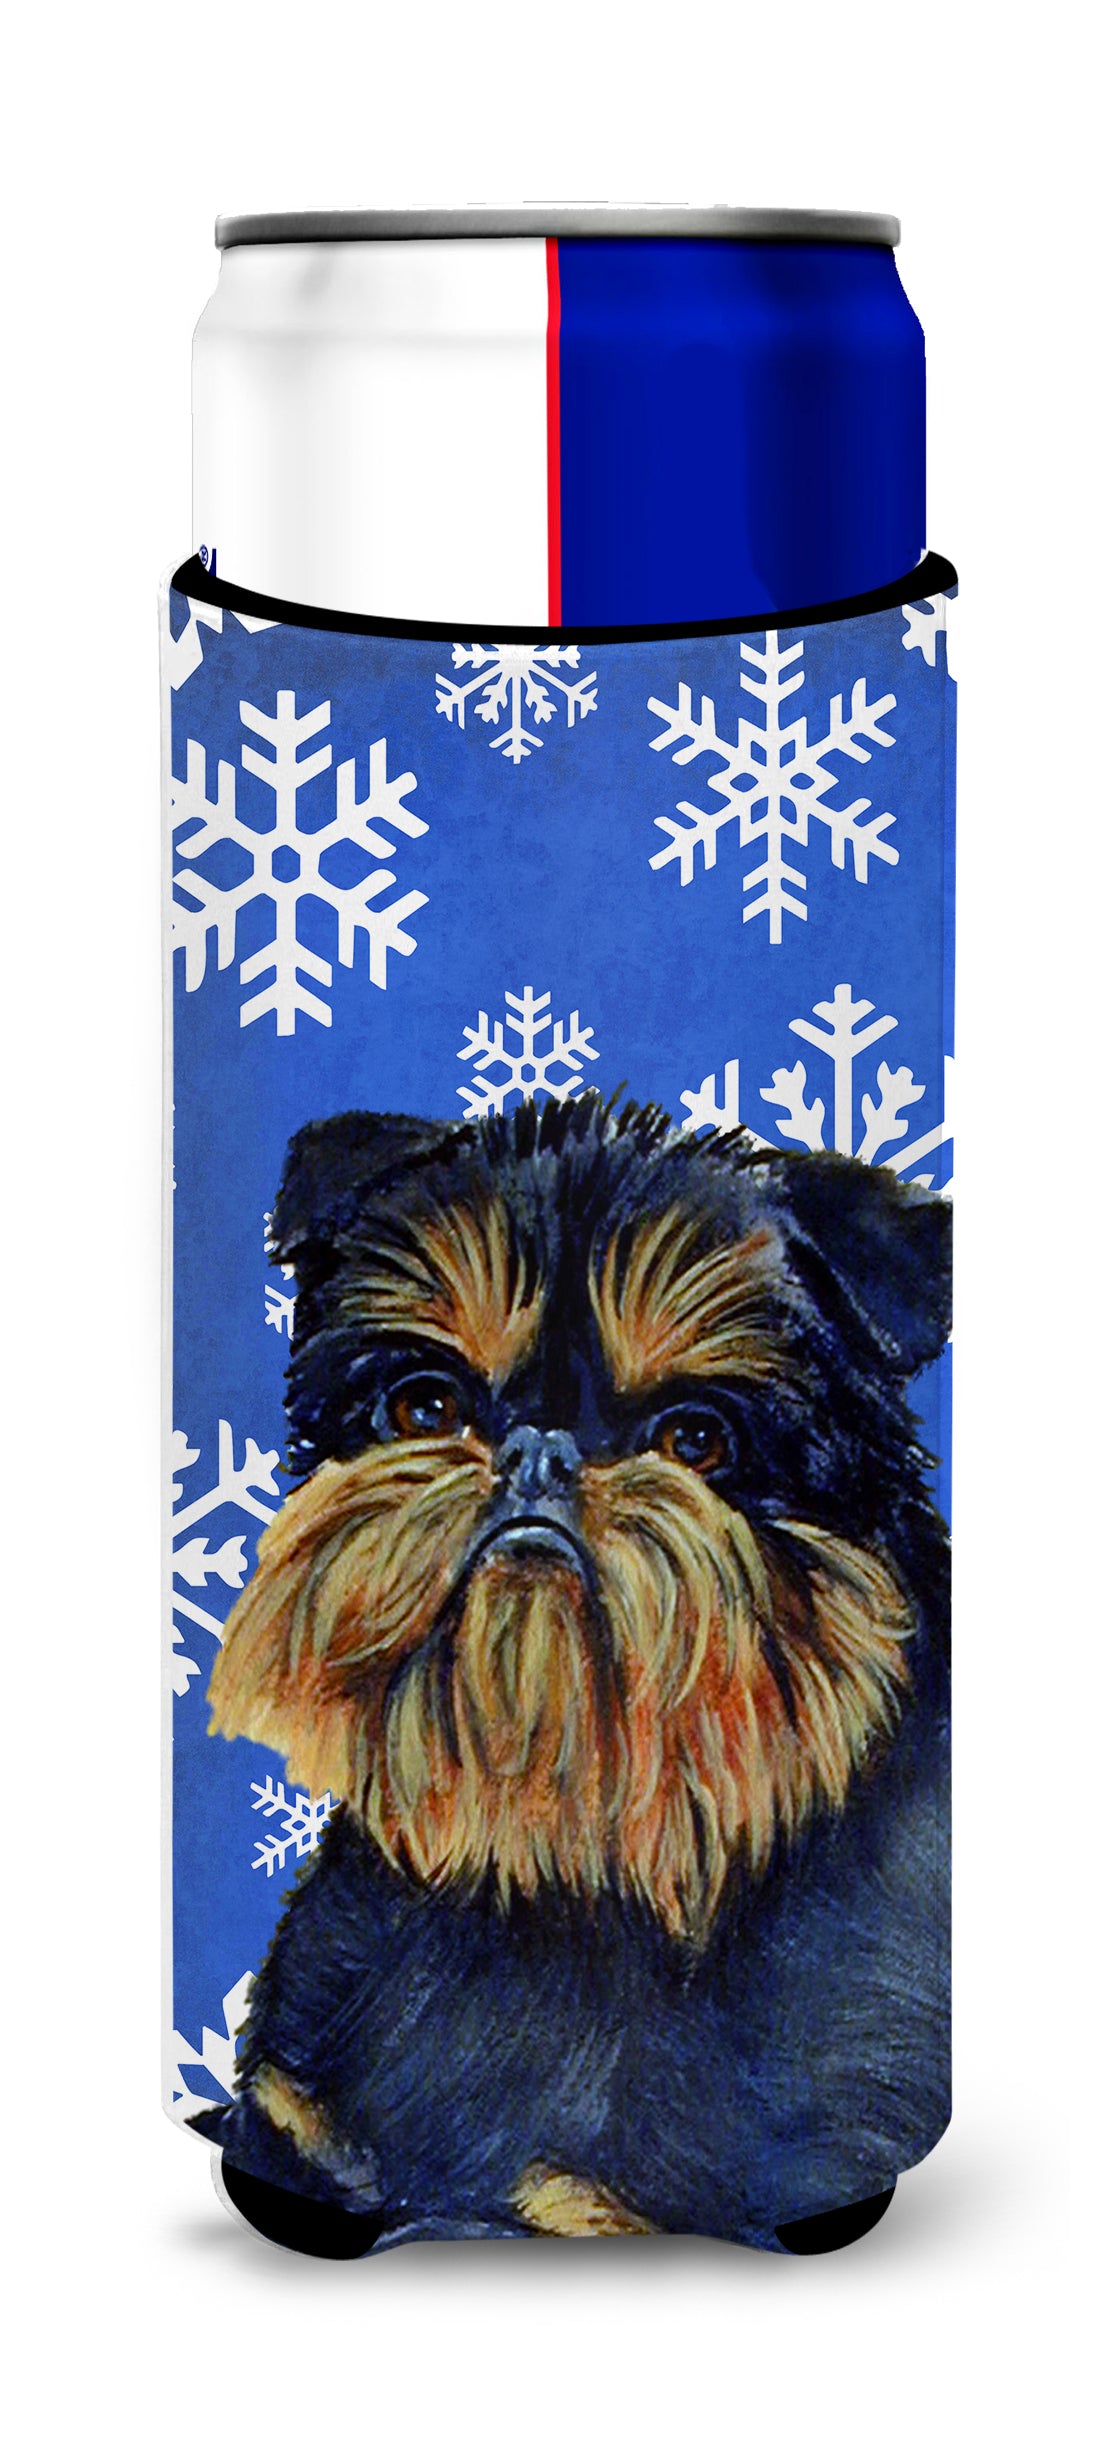 Brussels Griffon Winter Snowflakes Holiday Ultra Beverage Insulators for slim cans LH9298MUK.